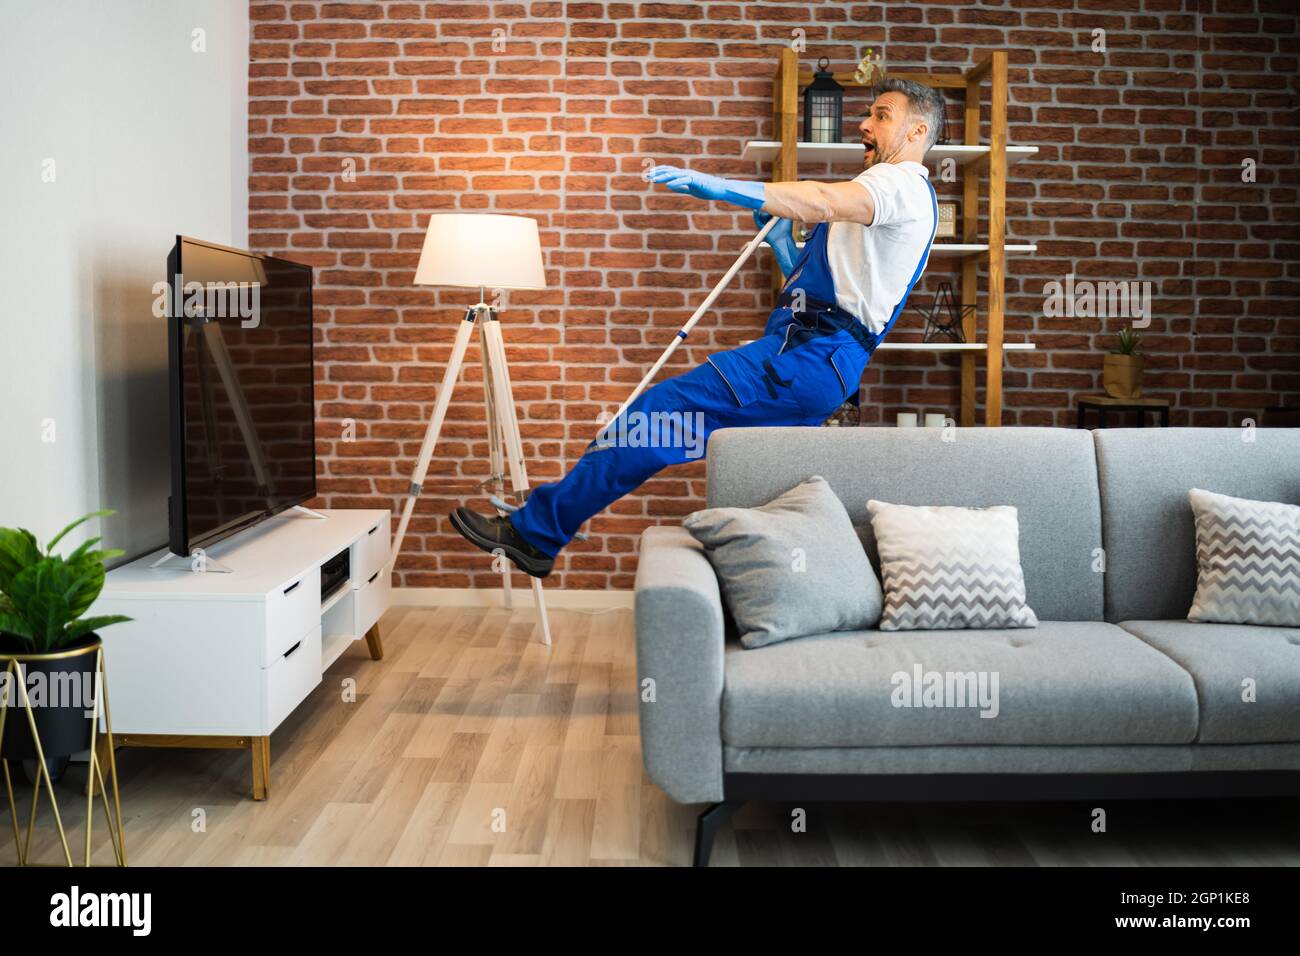 Domestic Slip And Fall Accident At Home. Falling Janitor Stock Photo